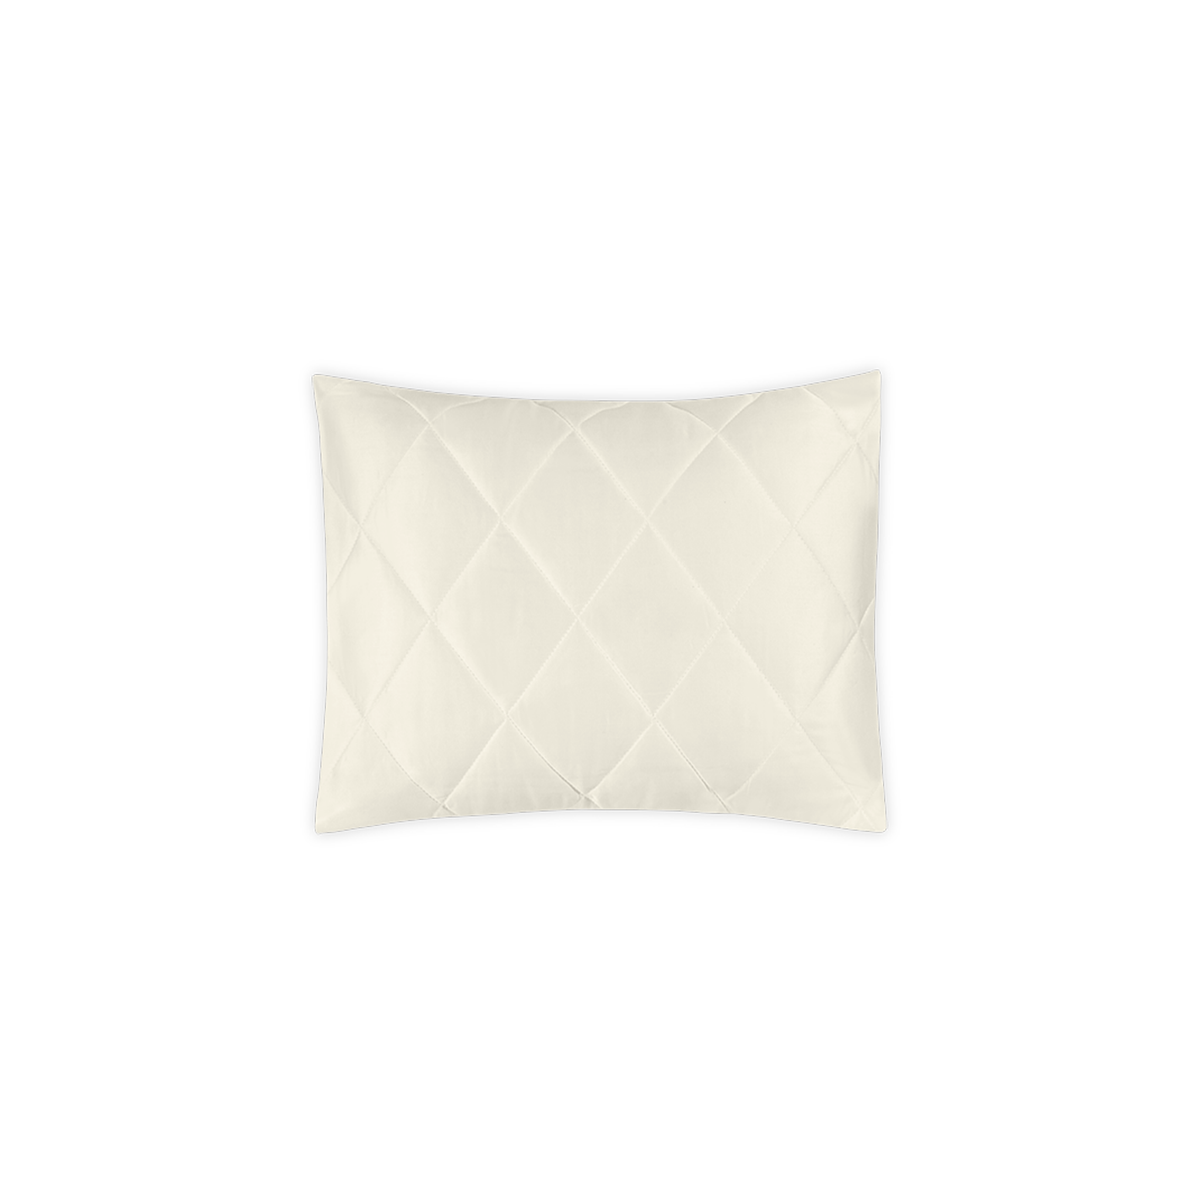 Silo Image of Matouk Nocturne Quilted Bedding Boudoir Sham in Ivory